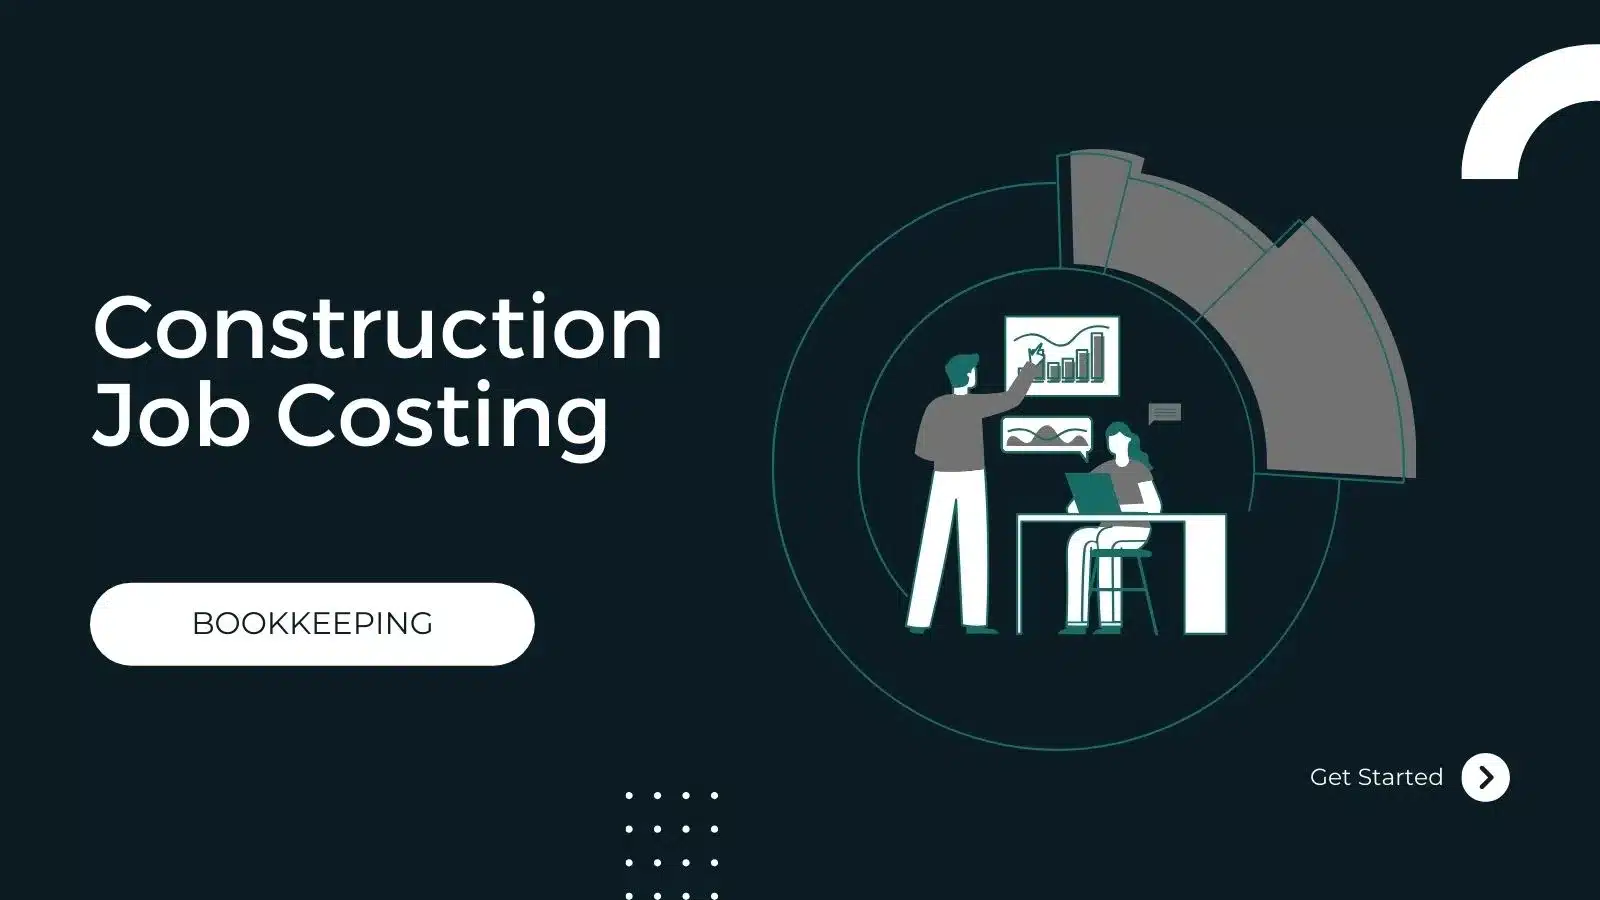 How to optimize construction job costing?